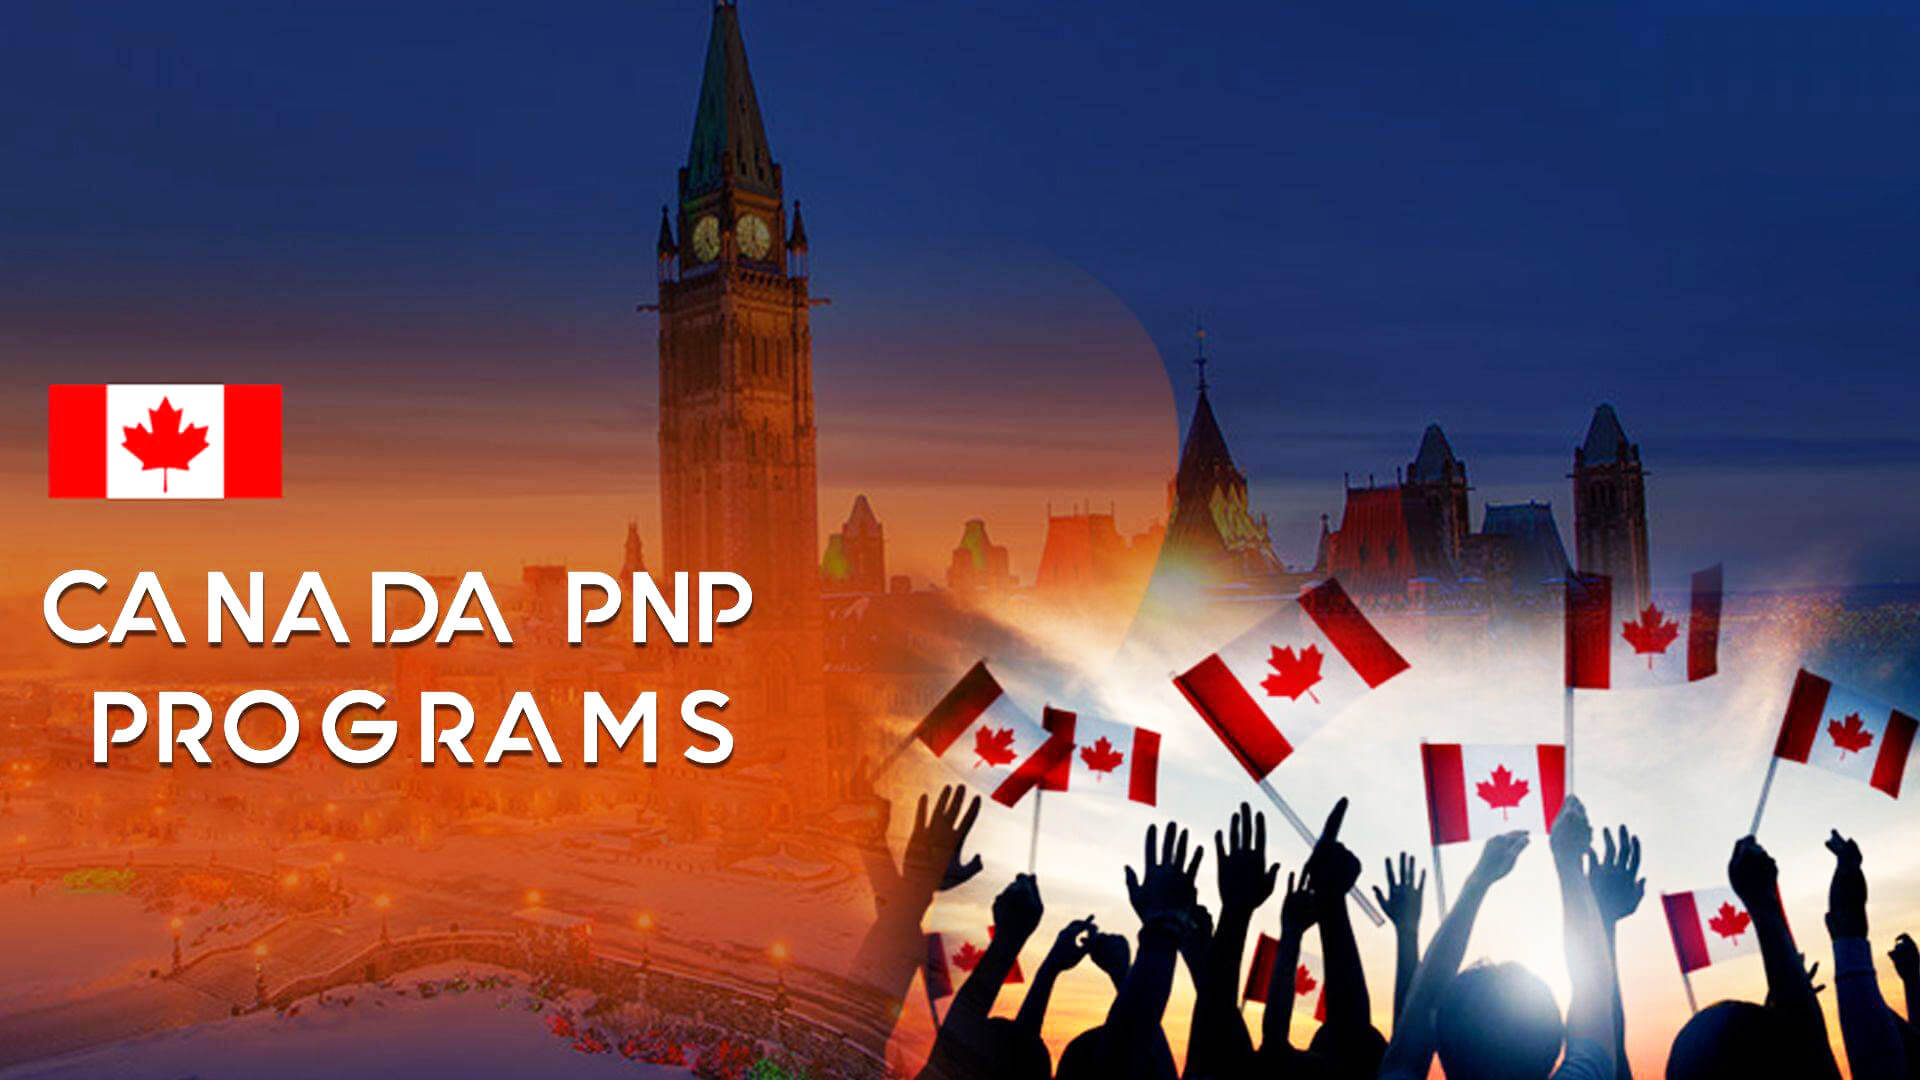 Provincial Nominee Program, BC PNP's. Each province has their own nominee programs.